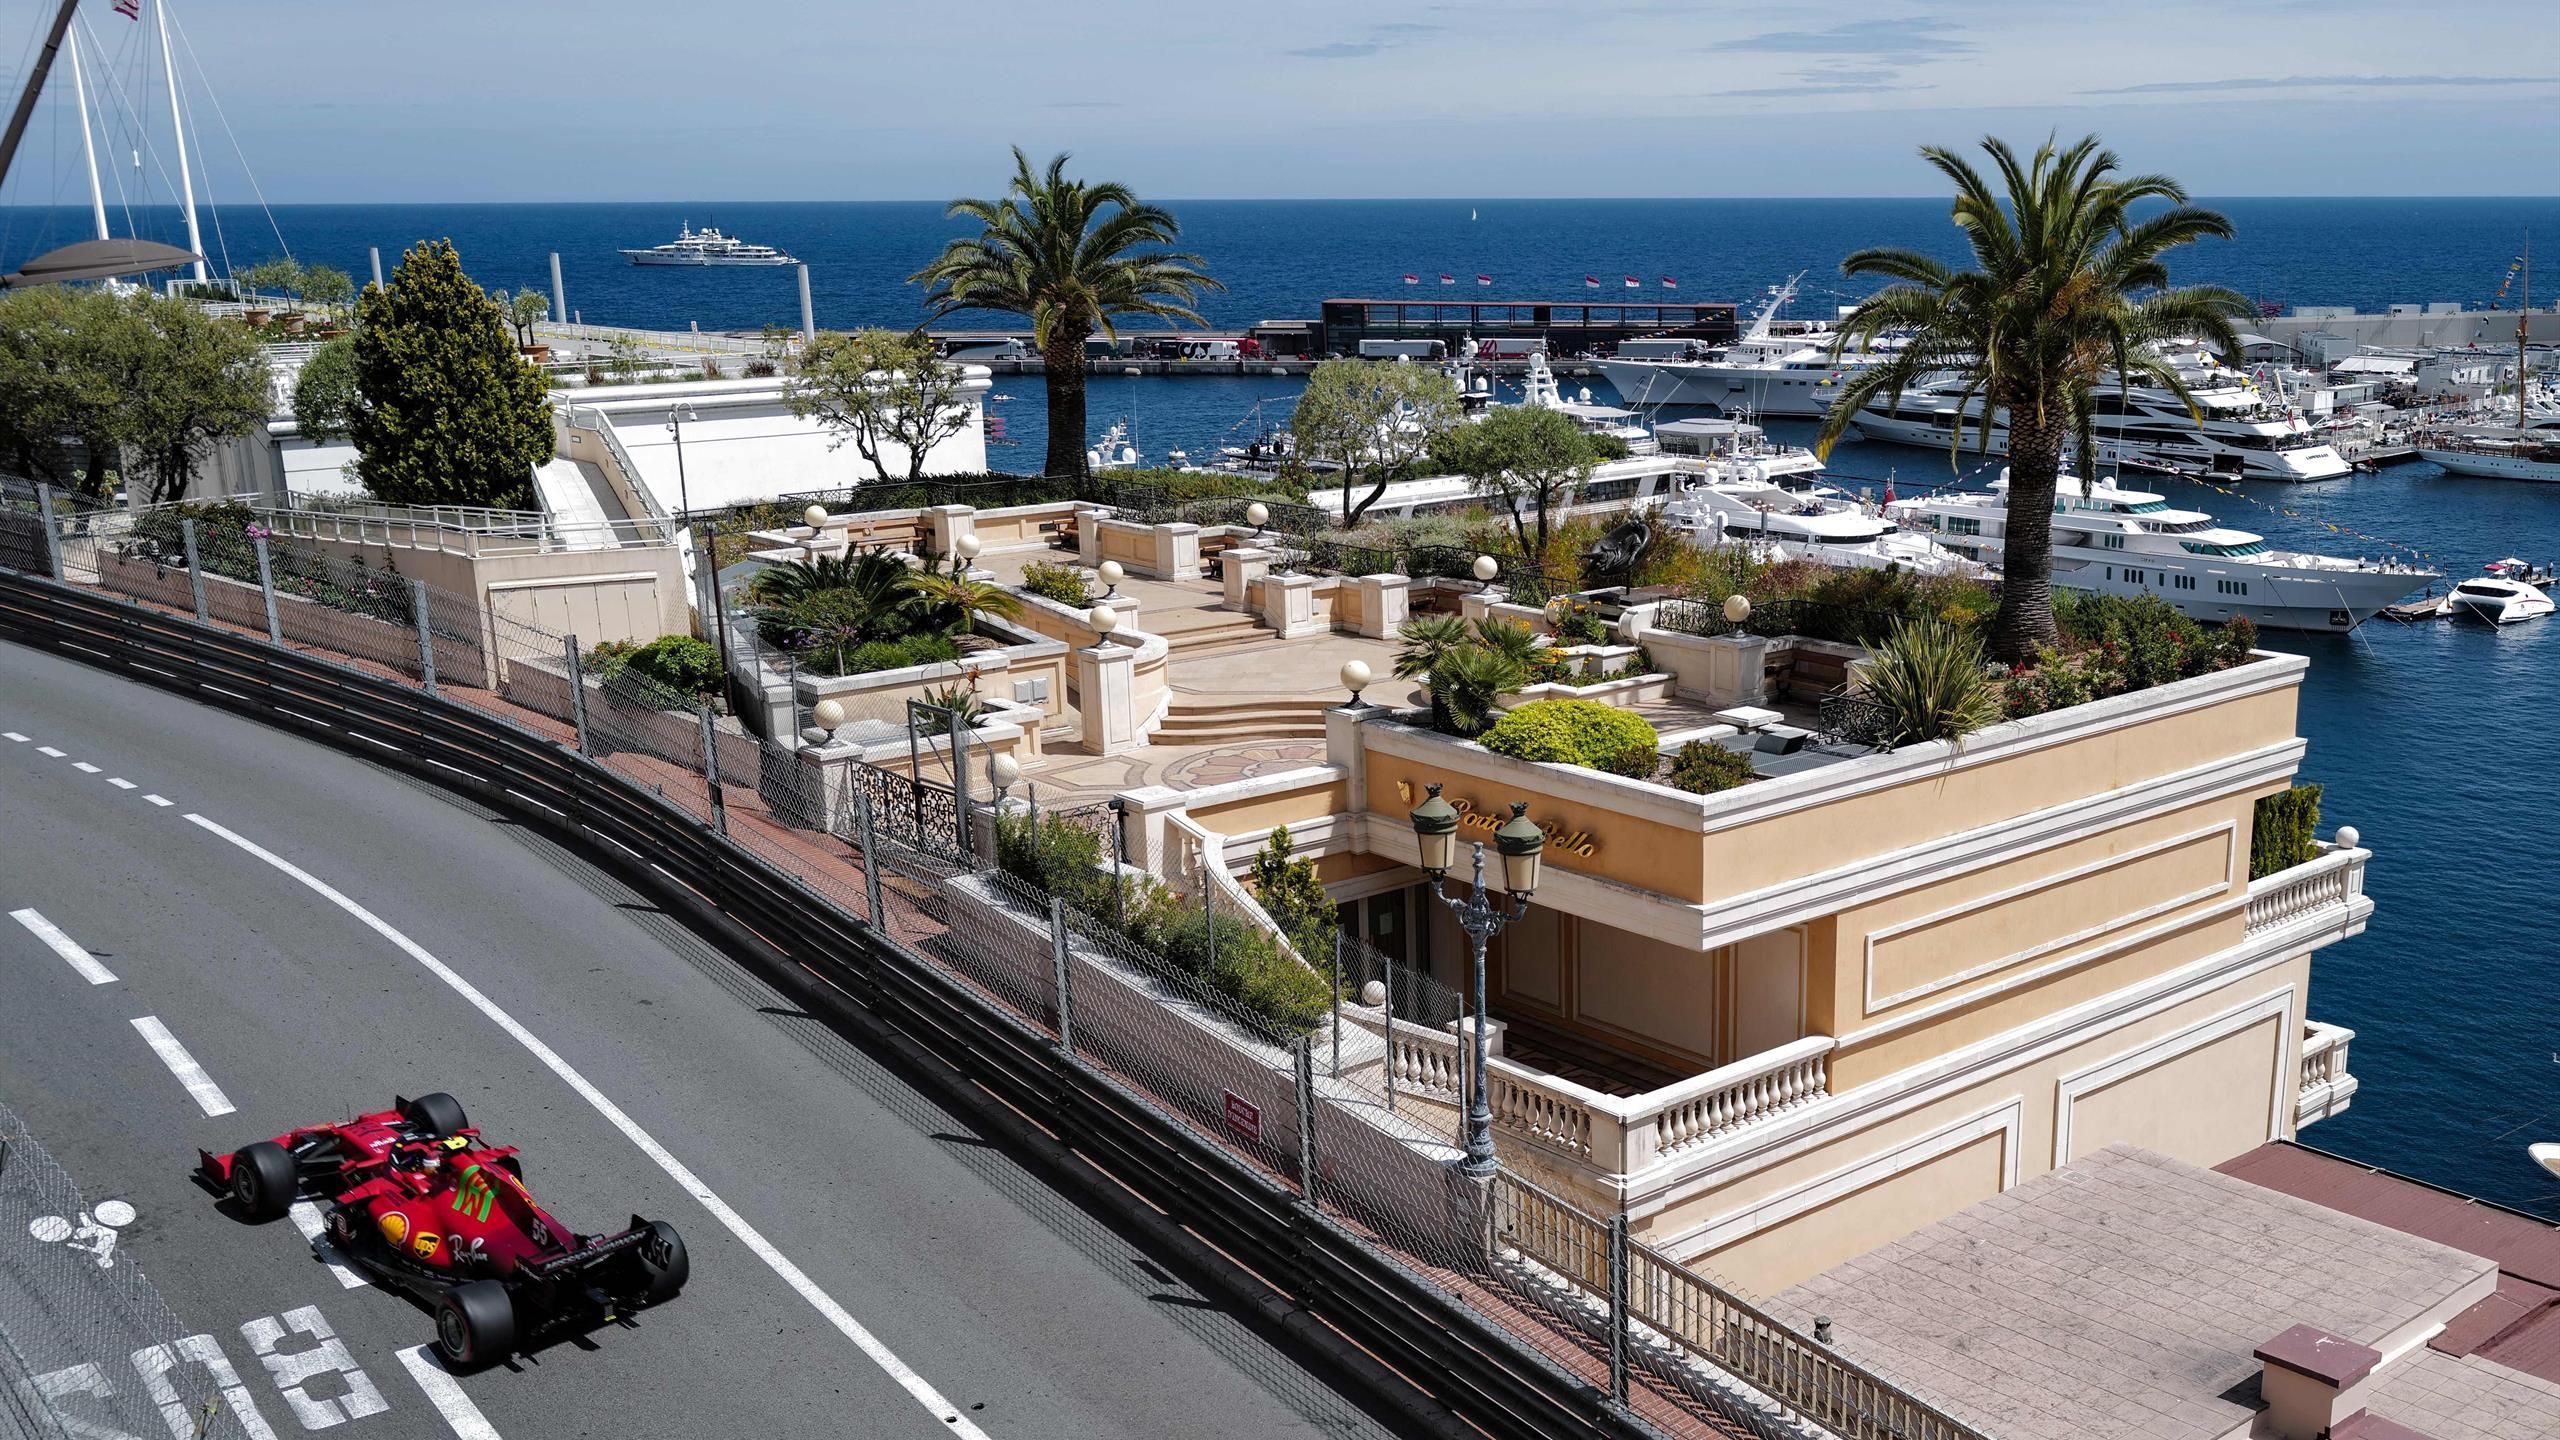 Why the Monaco Grand Prix must stay on the F1 calendar : PlanetF1